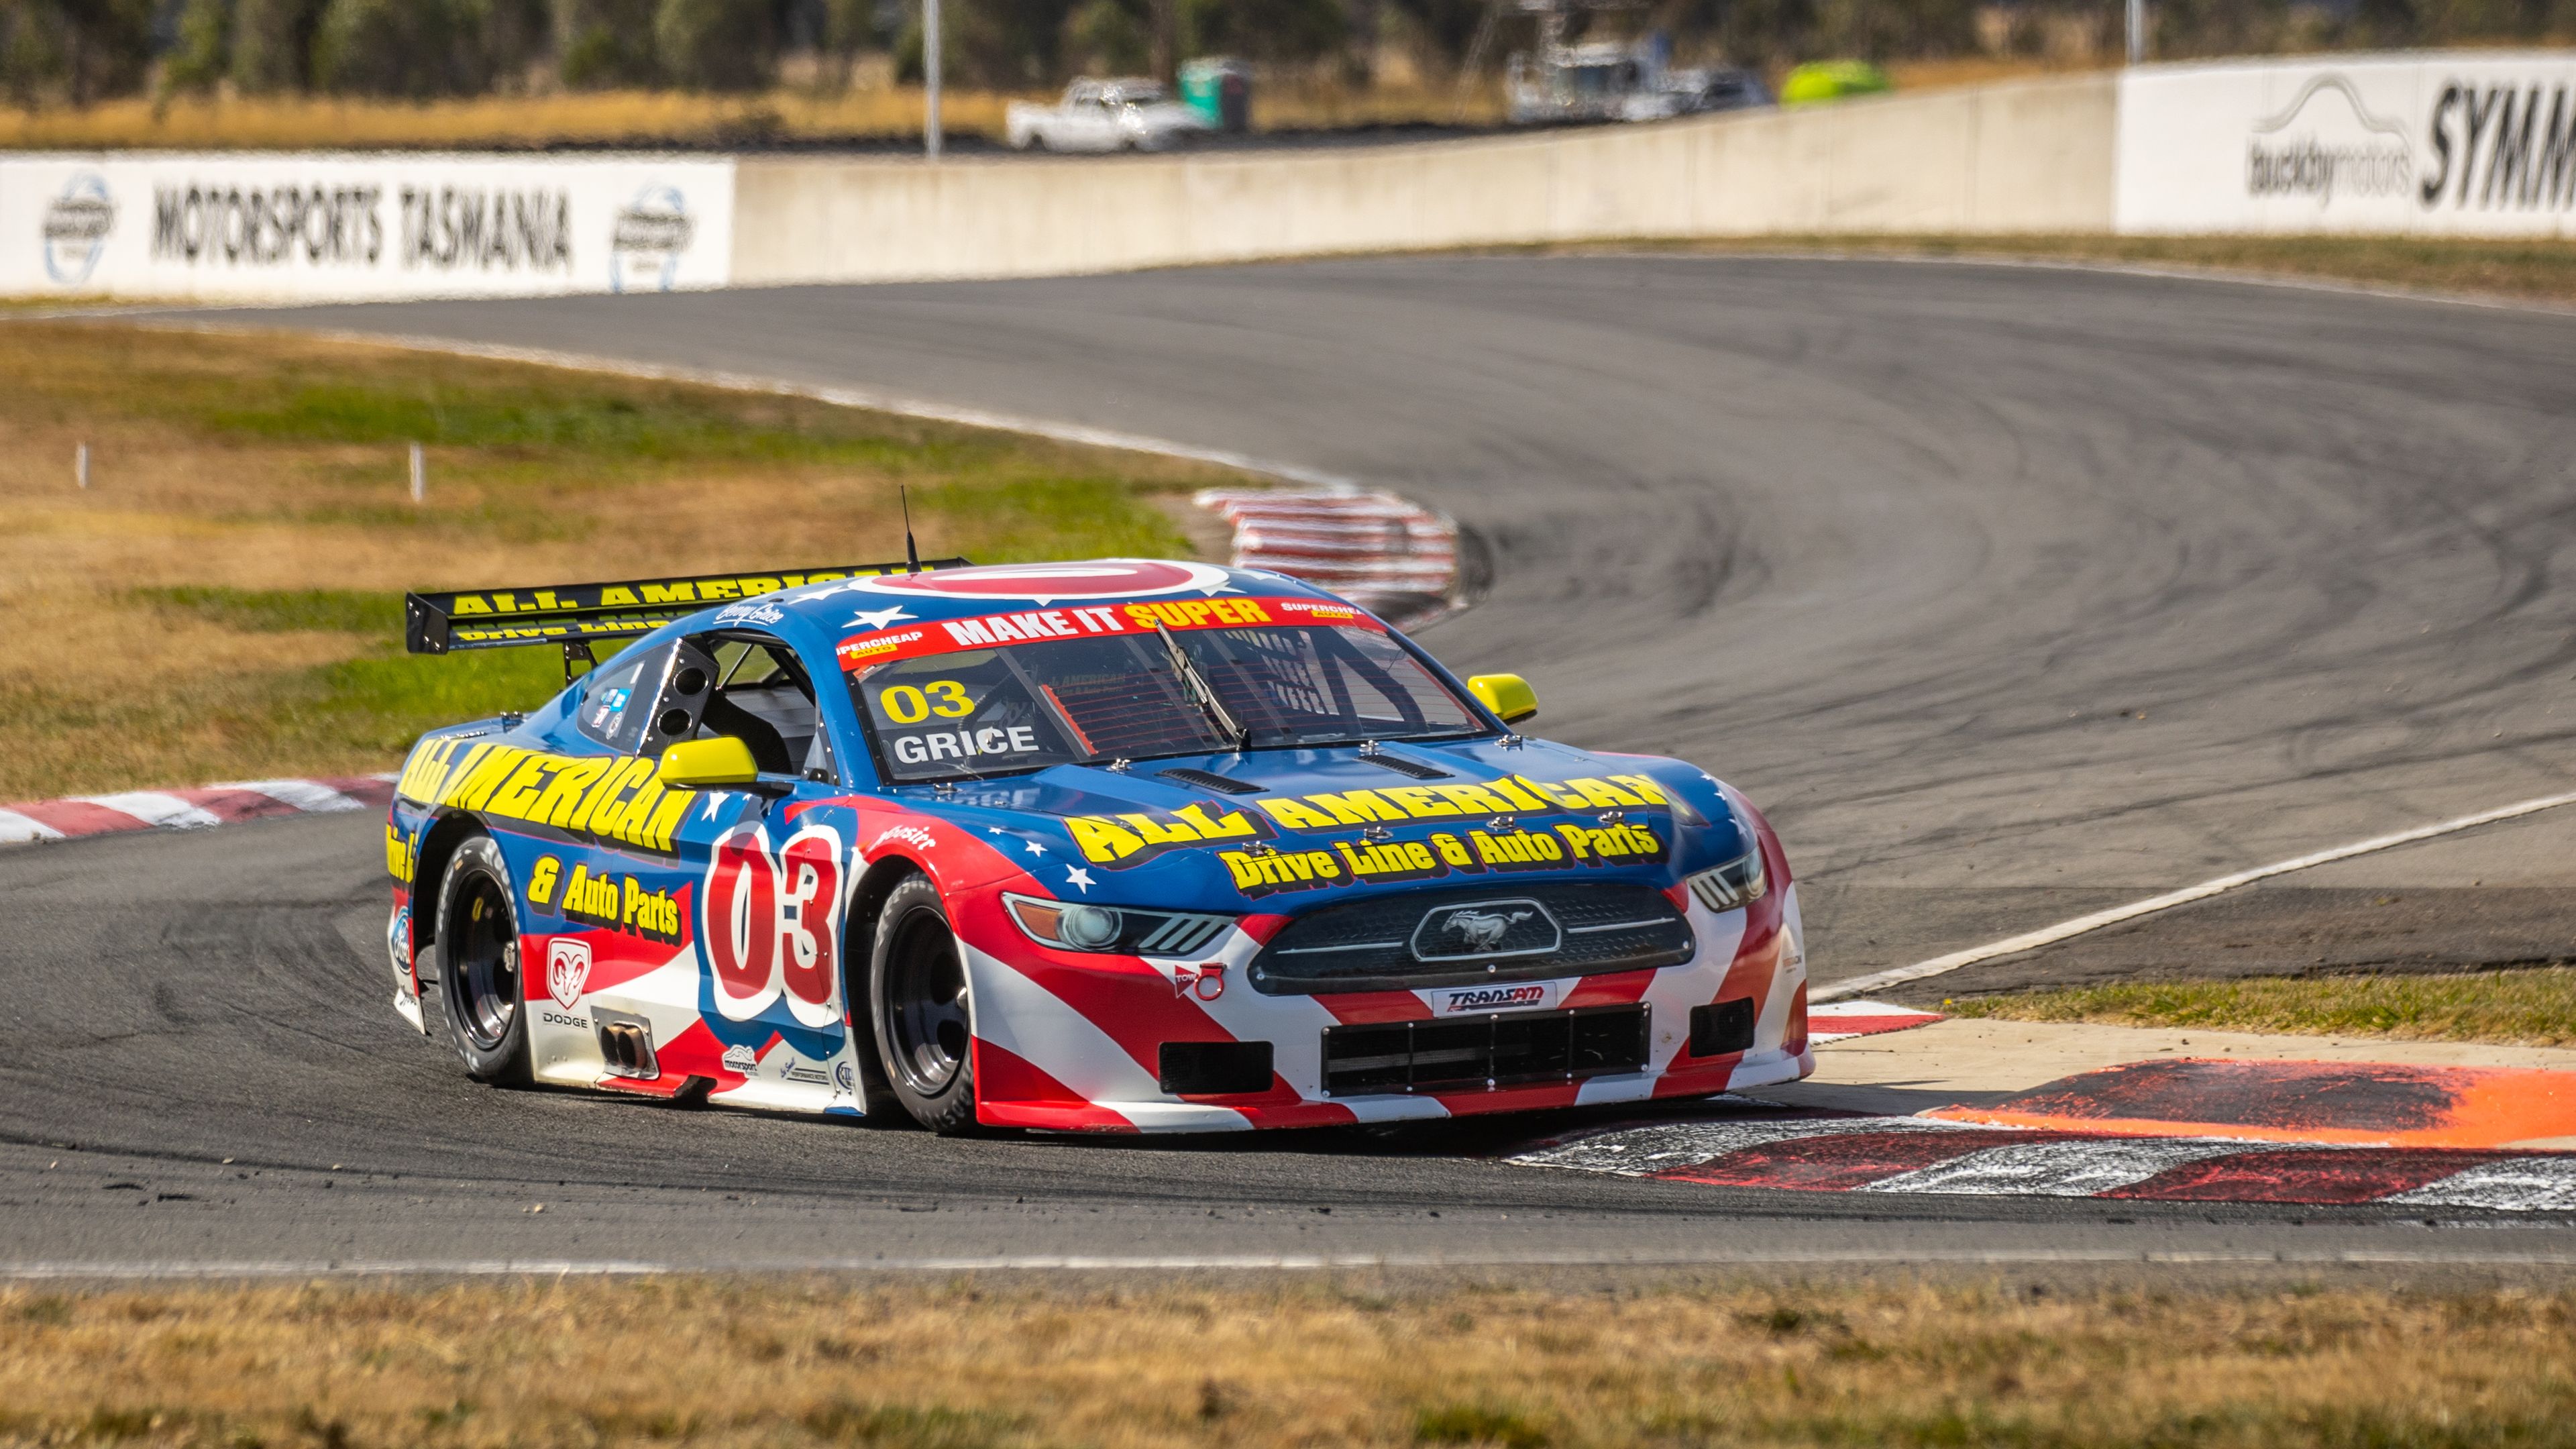 Trans Am title favourite Ben Grice roasts 'floppy roof' rivals